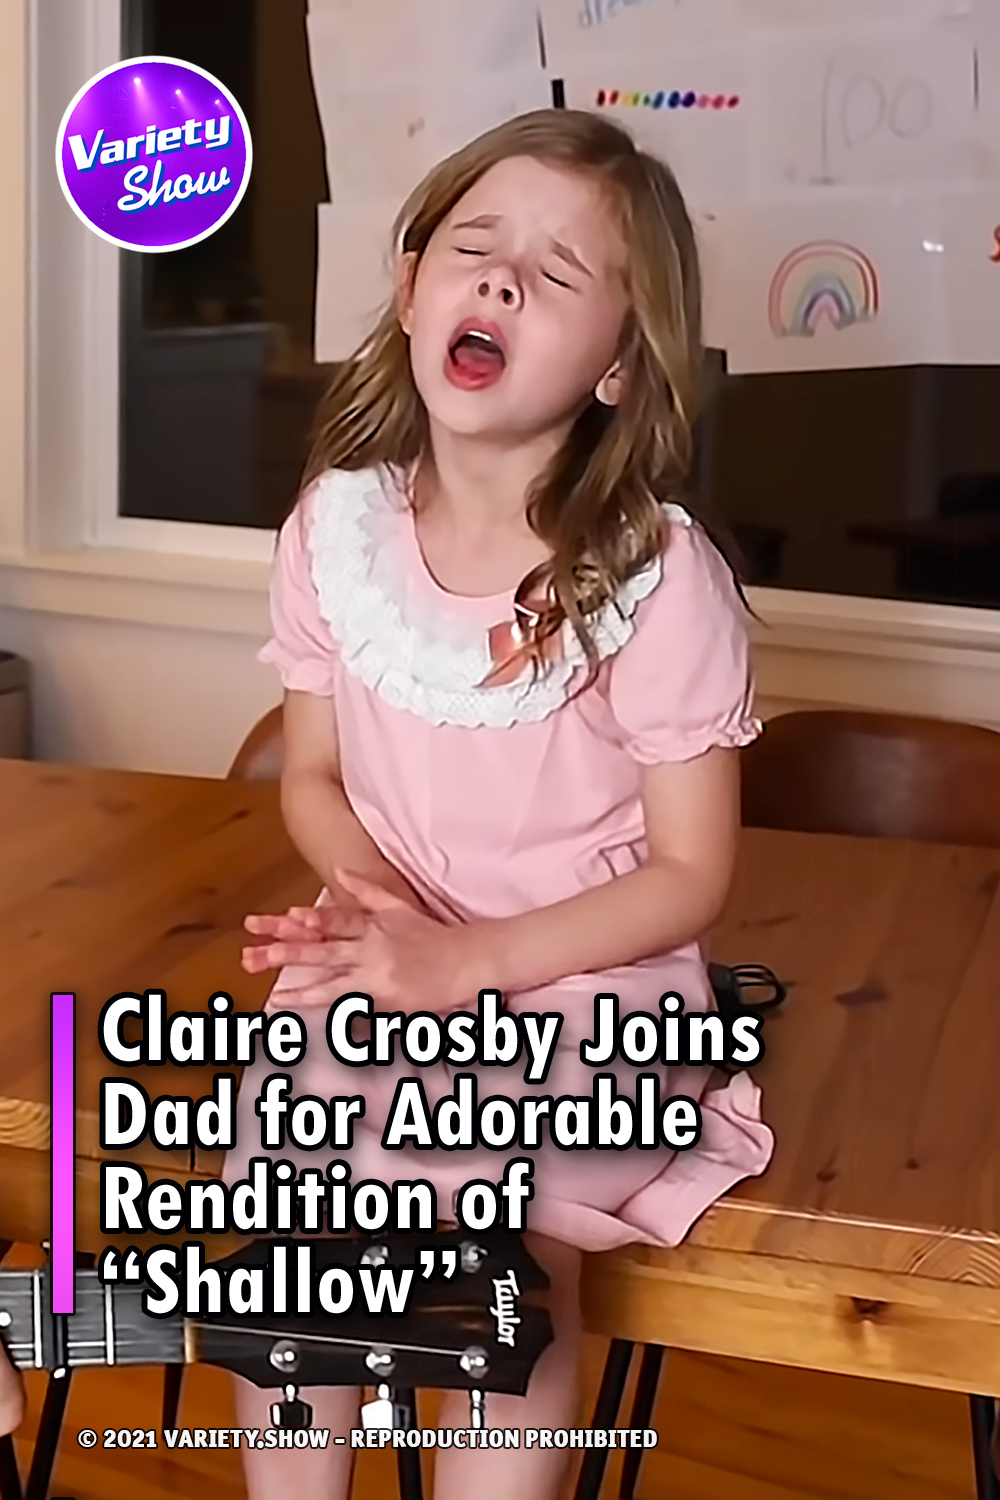 Claire Crosby Joins Dad for Adorable Rendition of “Shallow”